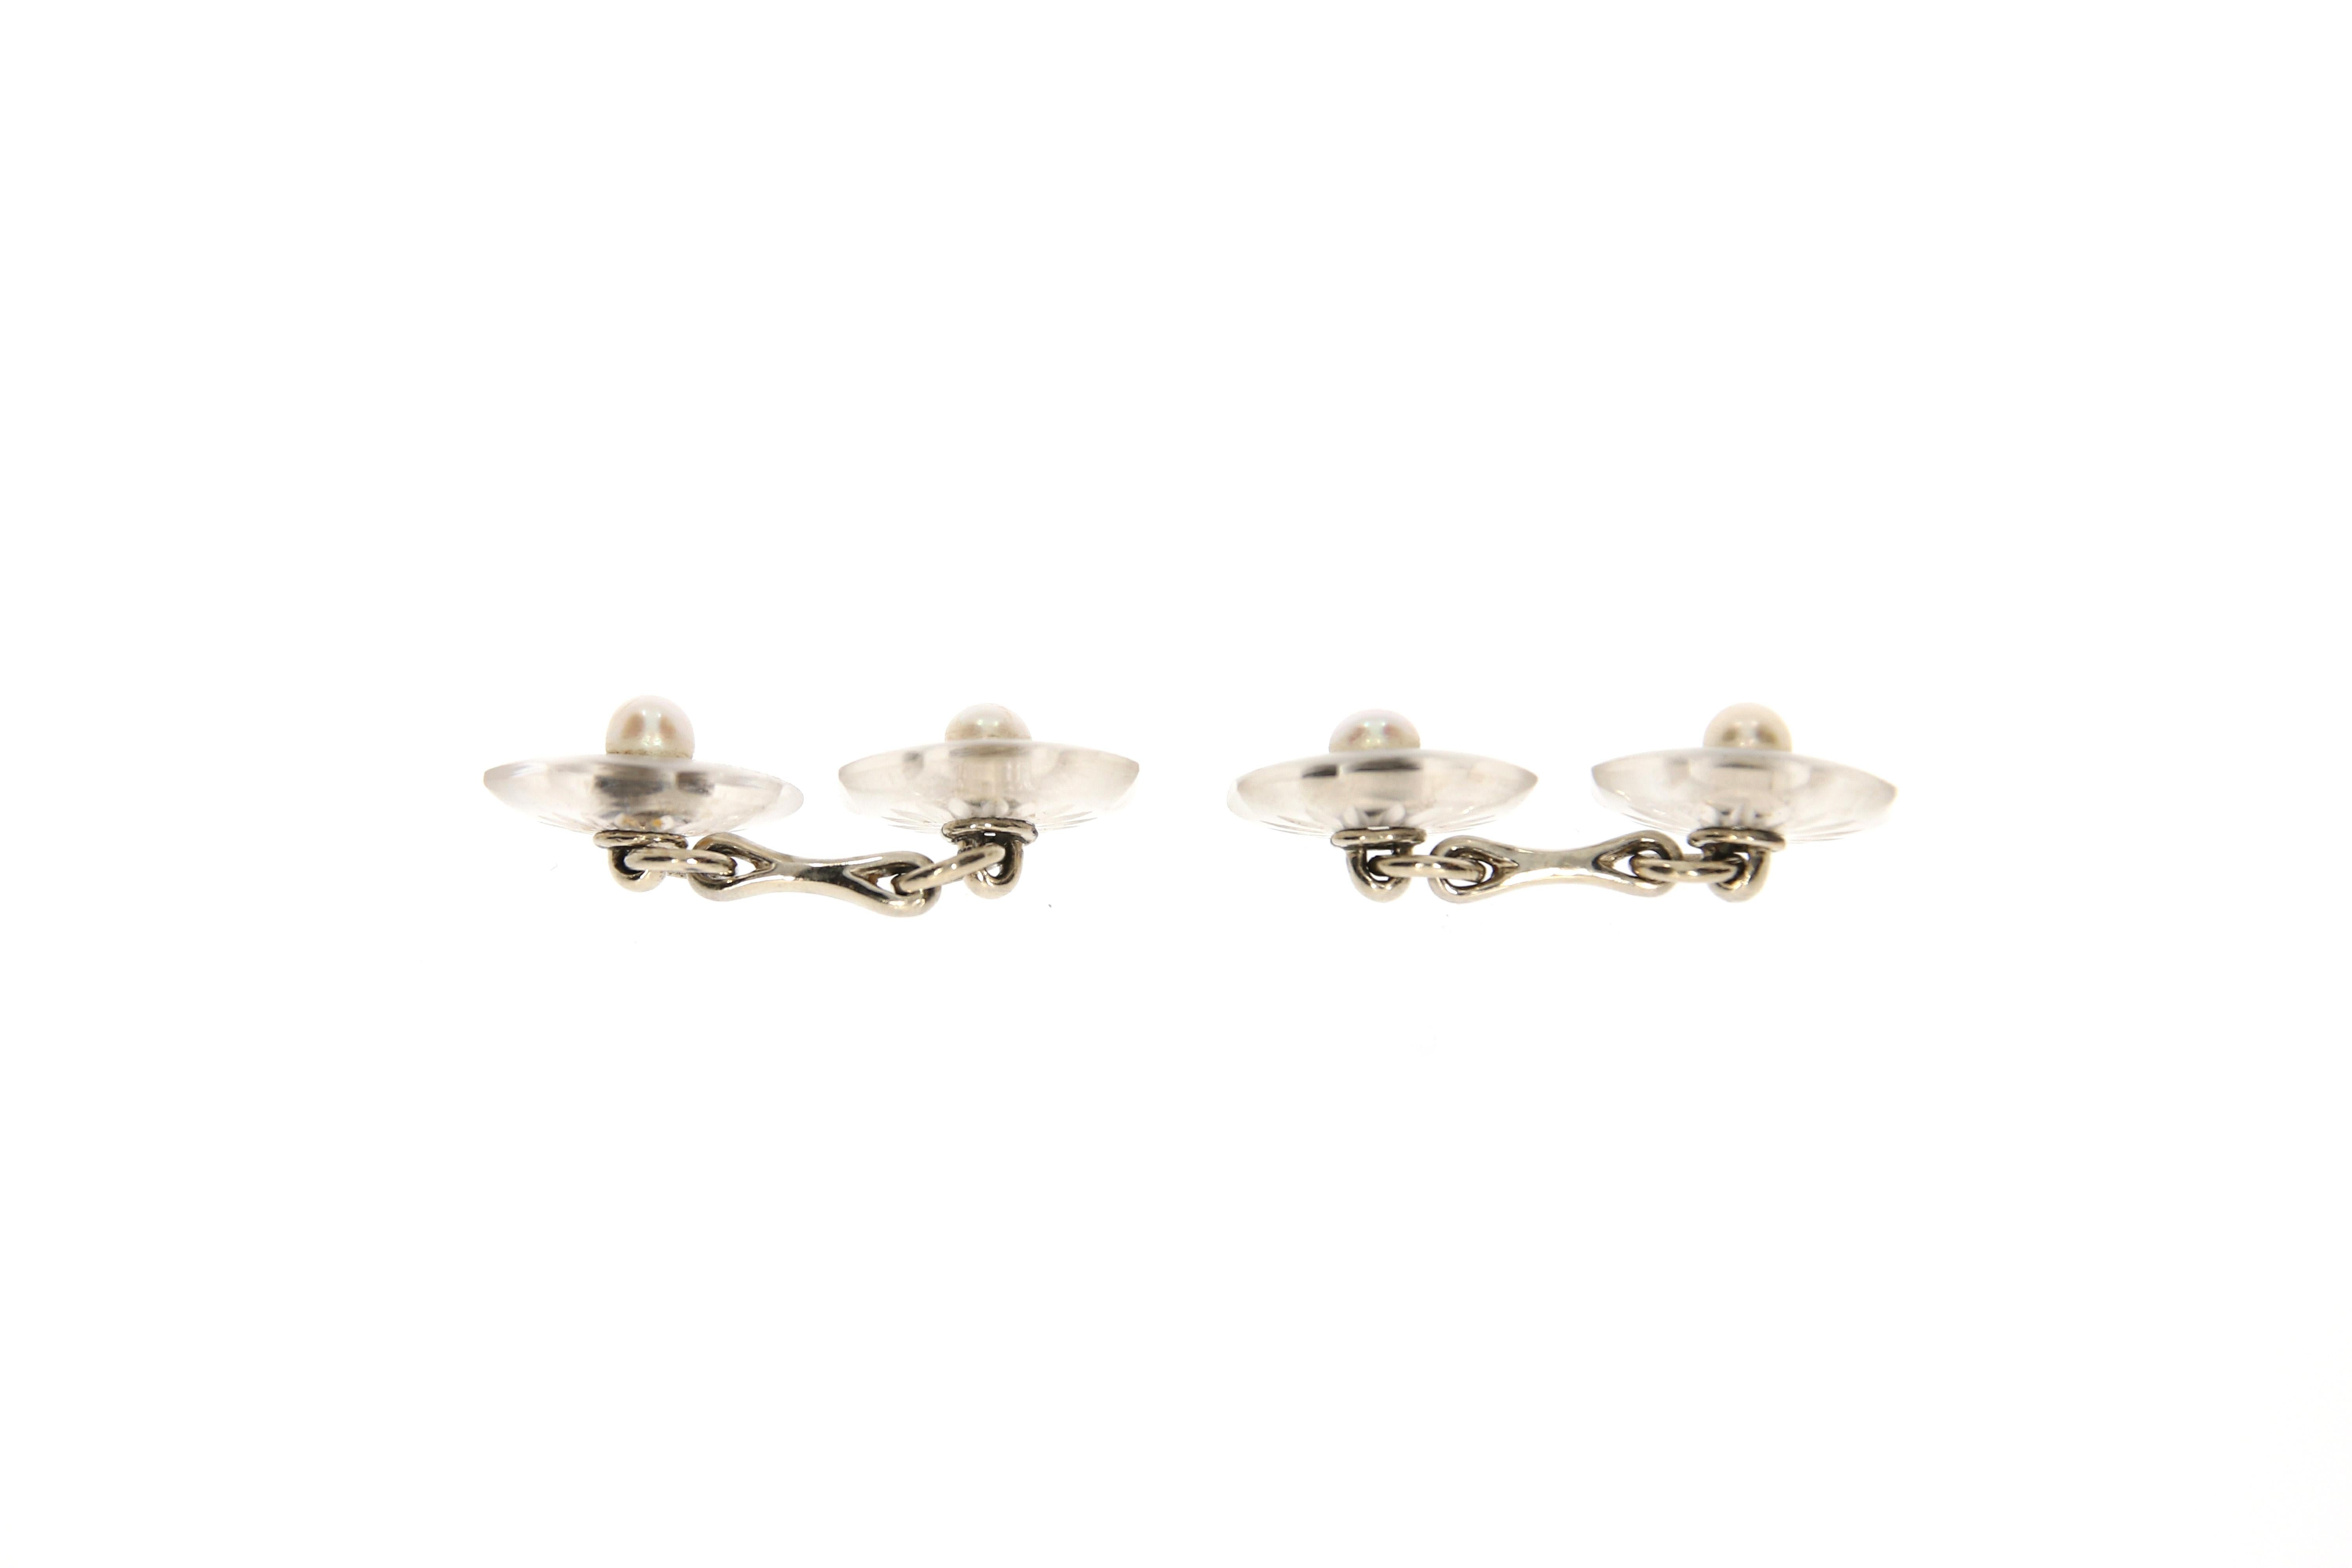 A delightful pair of rock crystal Cufflinks. Each designed as a flower, centered by 4 natural pearl buttons. Floral engravings. Platinum setting.